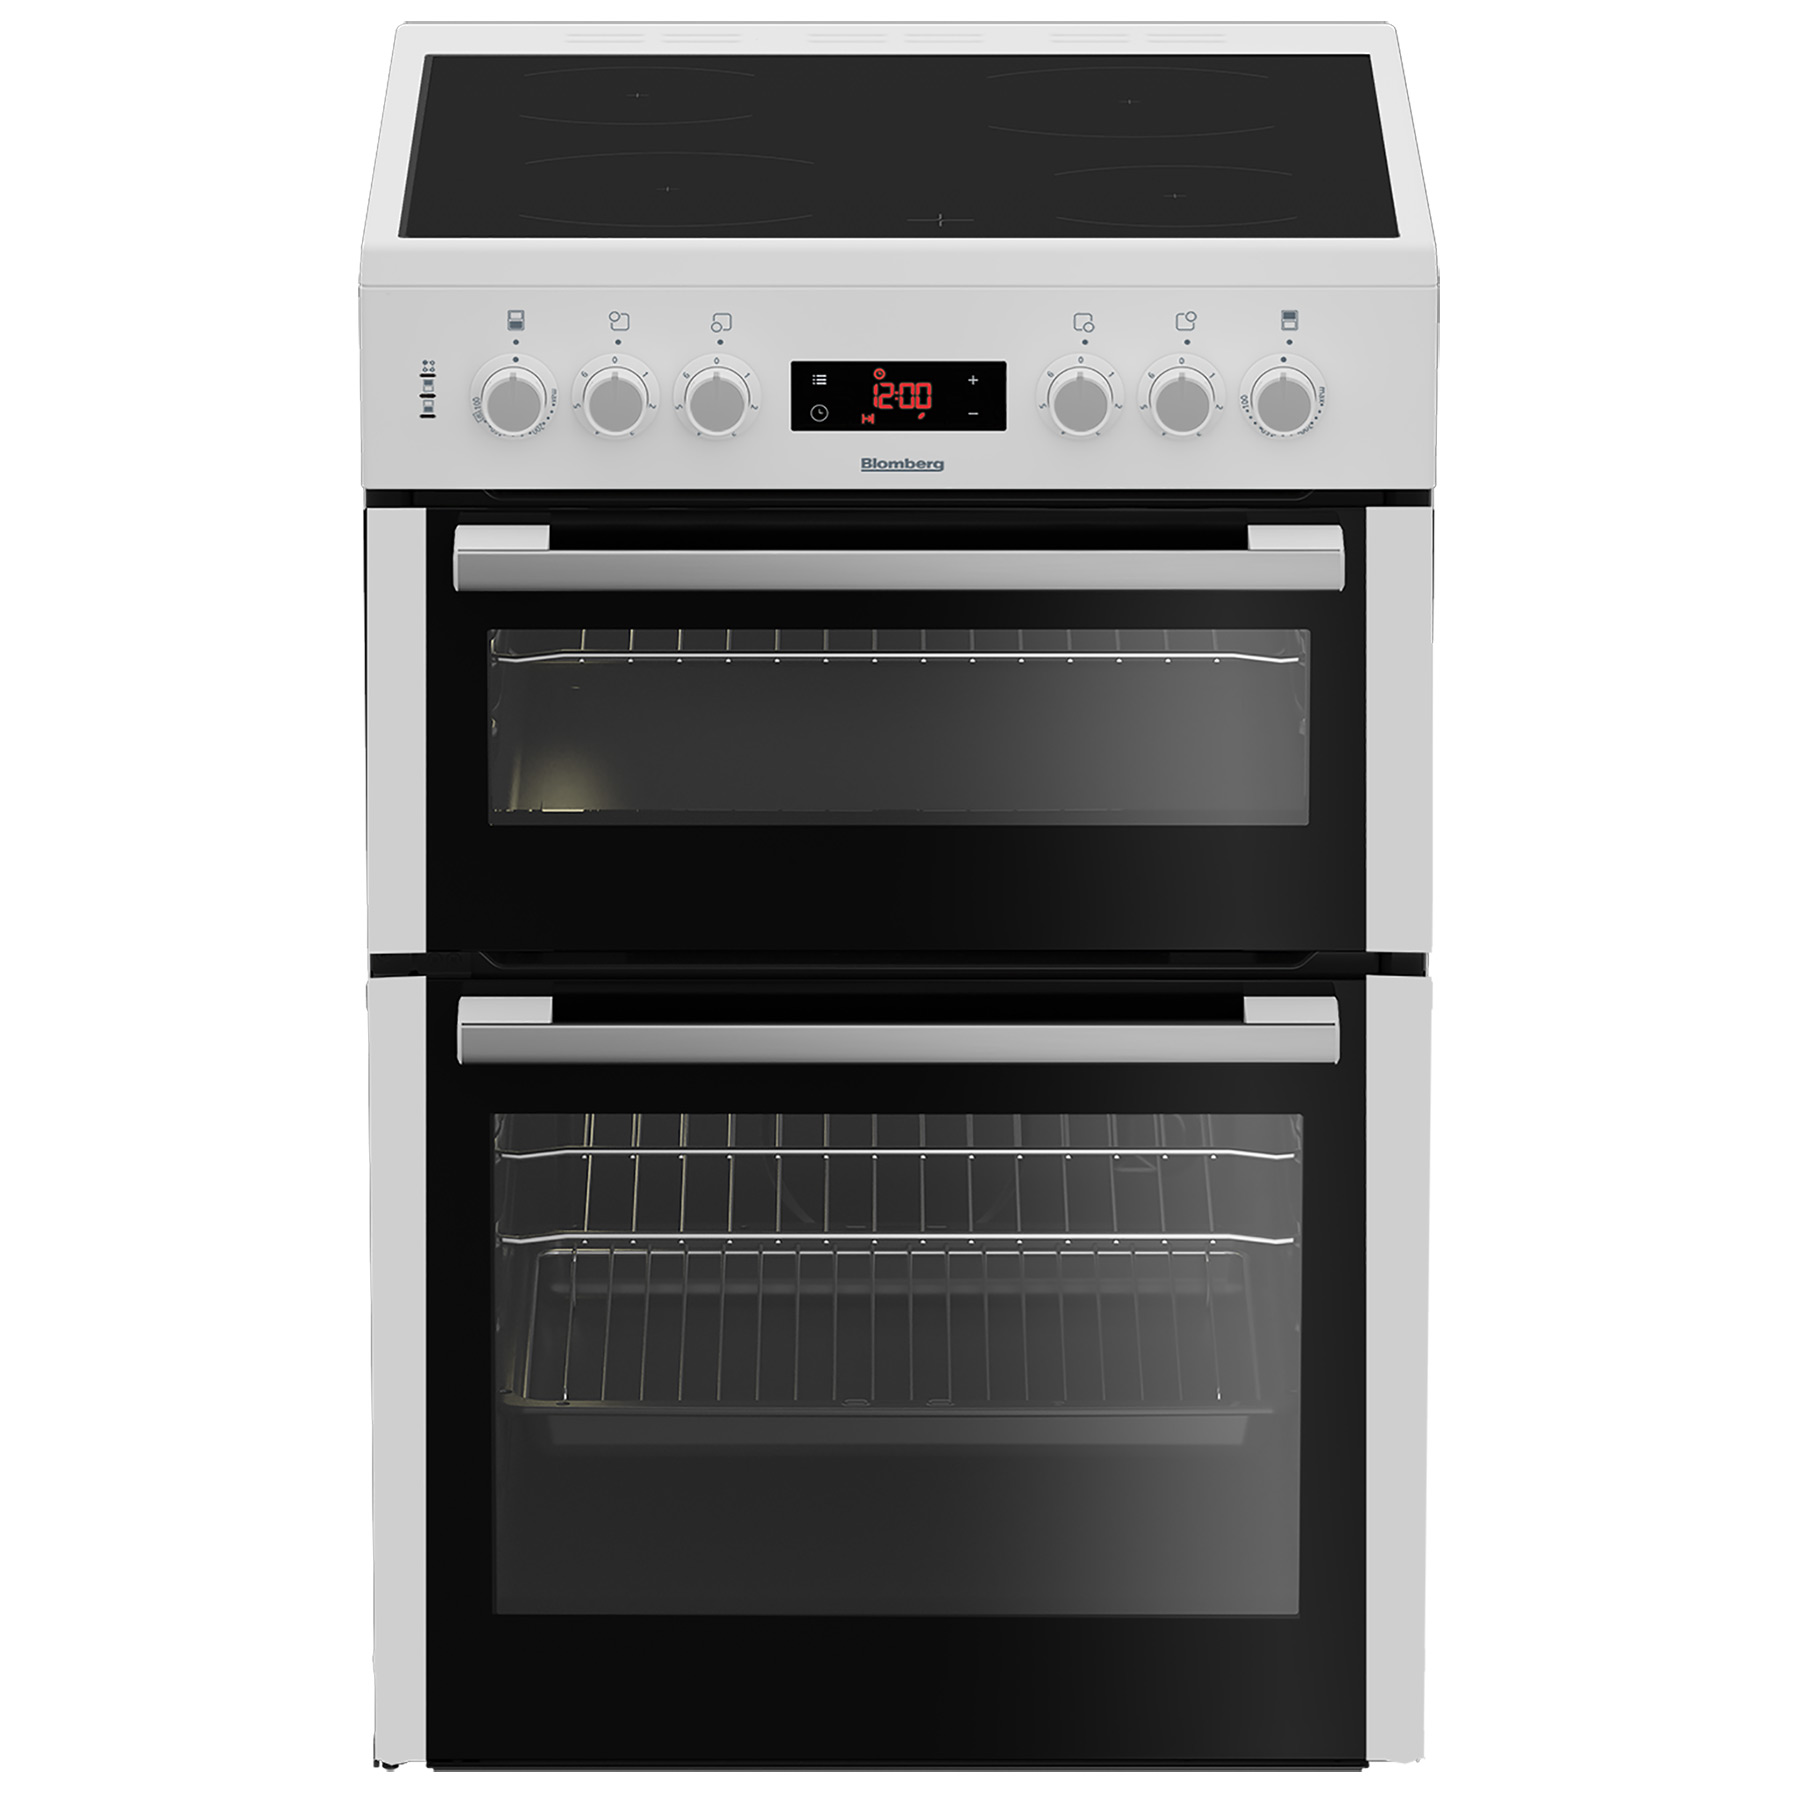 Image of Blomberg HKN65W 60cm Double Oven Electric Cooker in White Ceramic Hob